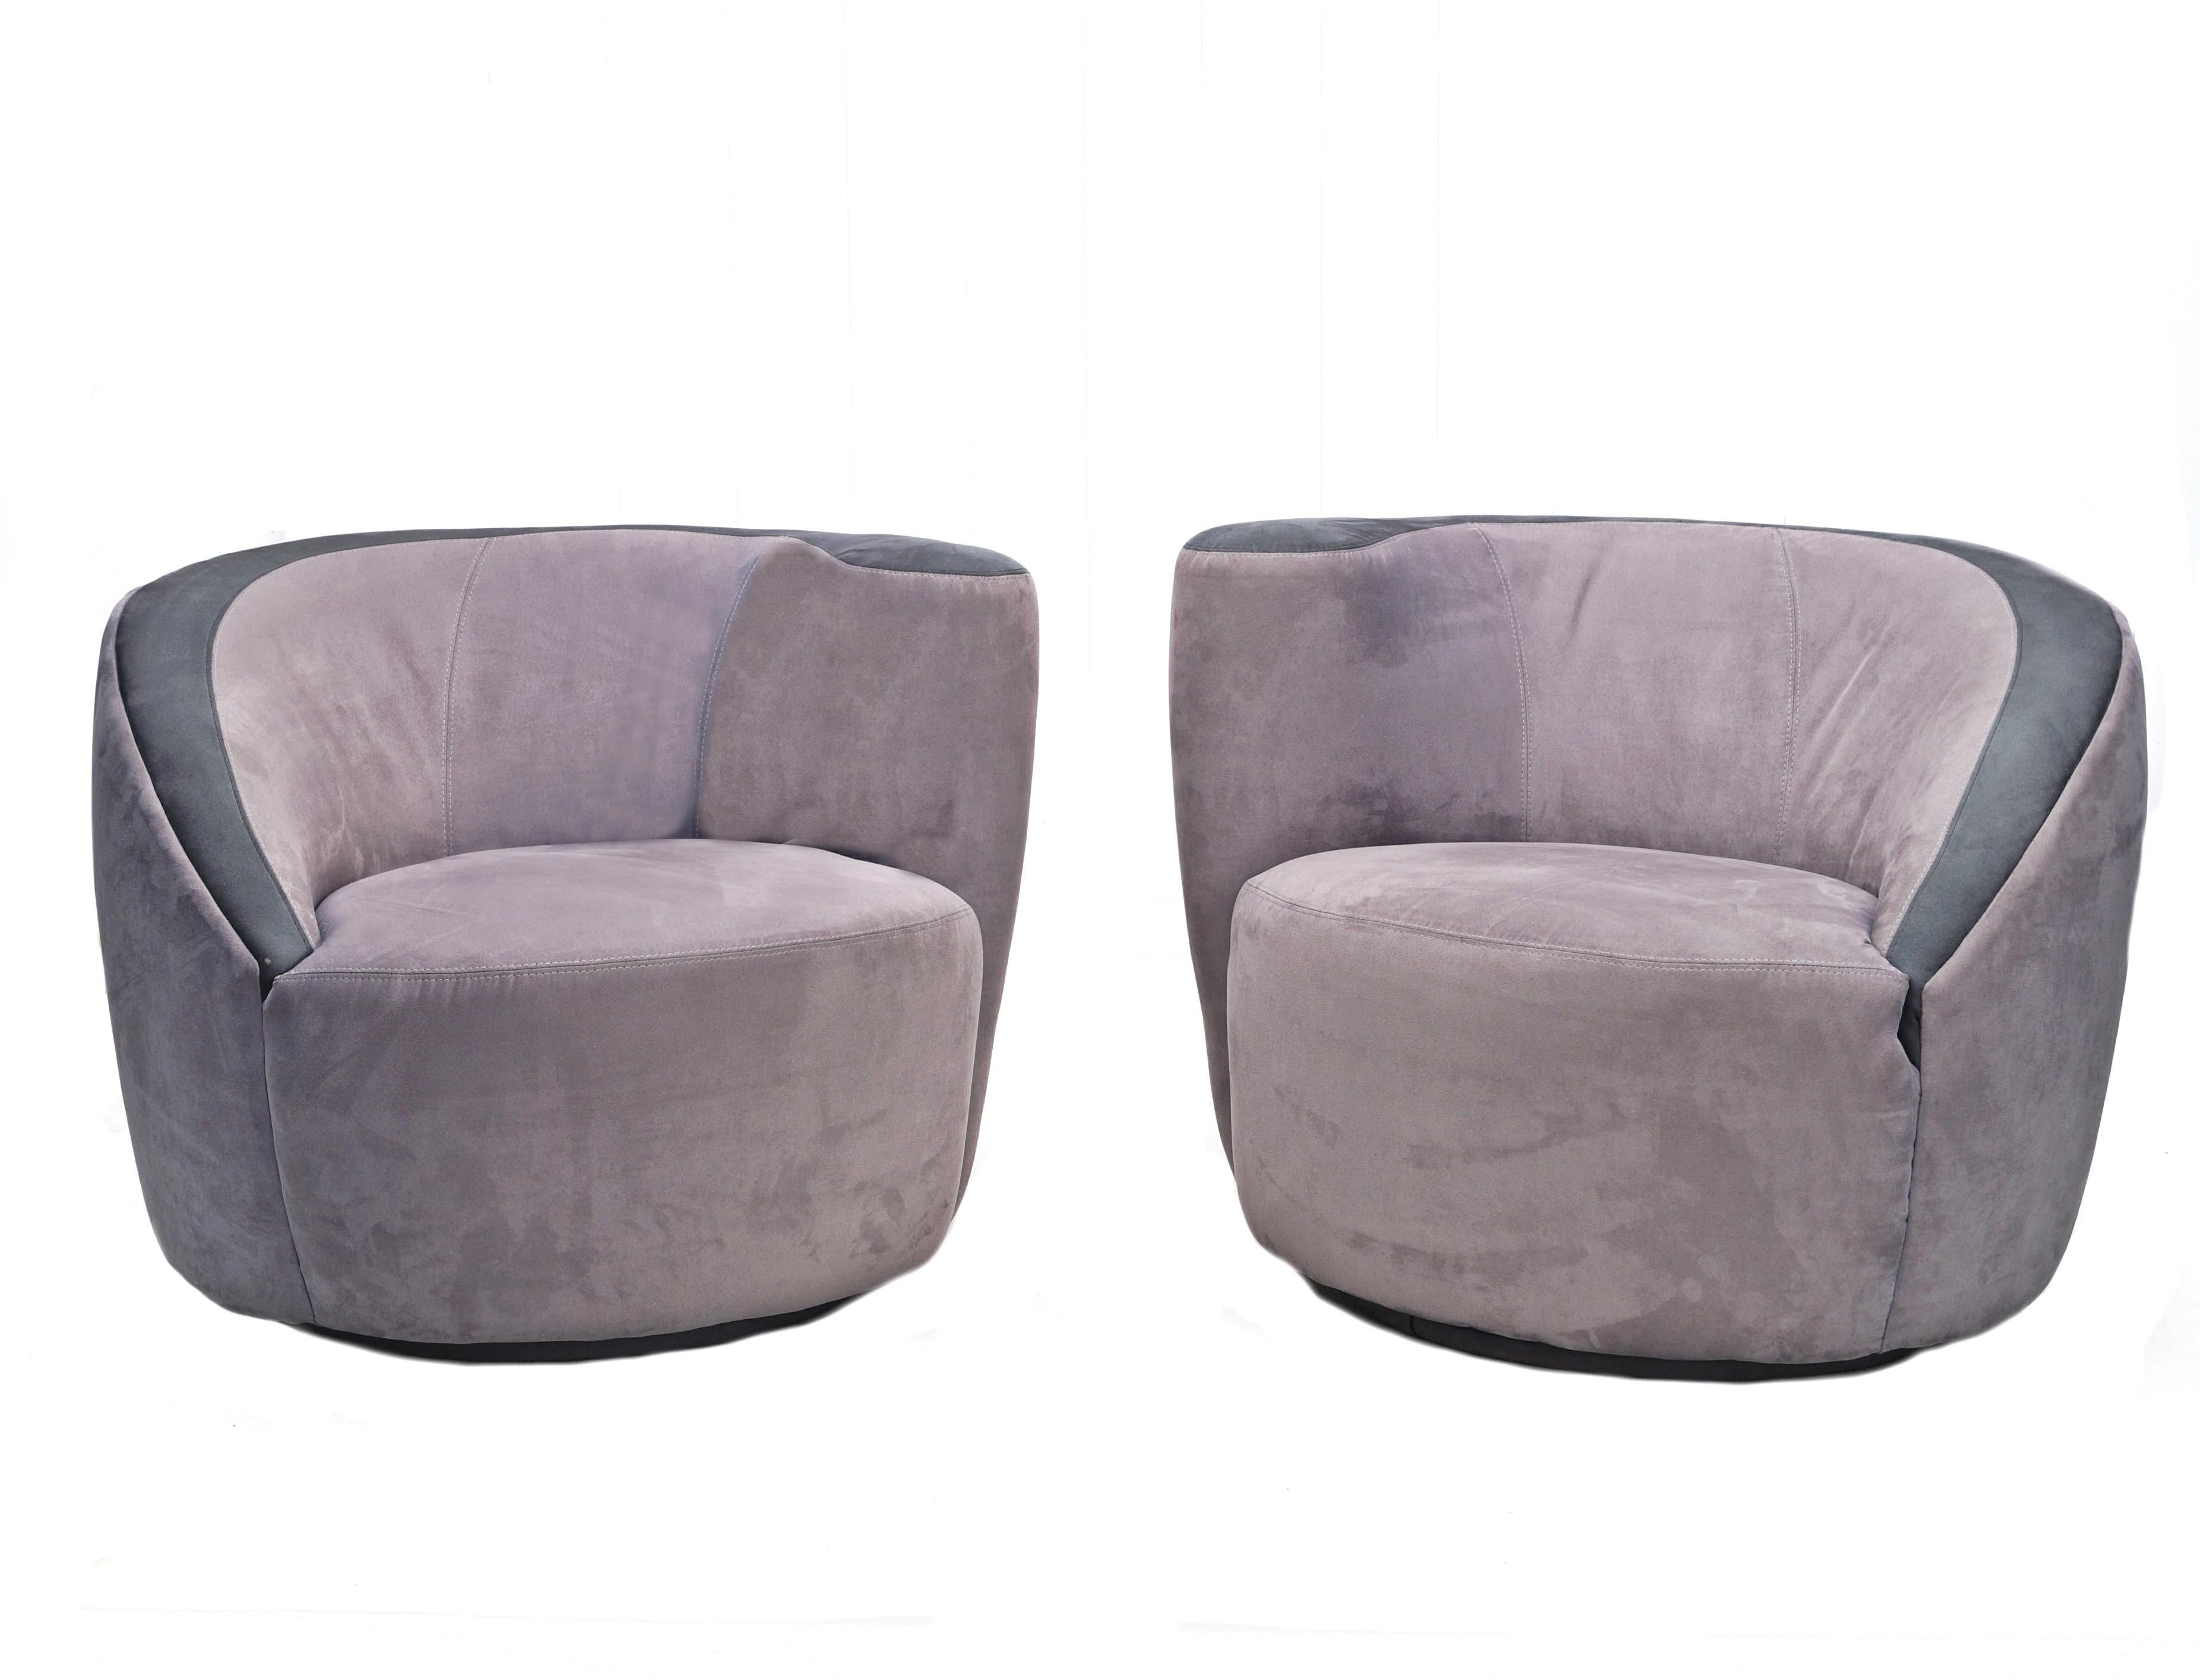 Pair of grey nautilus swivel club chairs attributed to directional.

If you are in the New Jersey, New York City Metro Area, please contact us with your delivery zipcode, as we may be able to deliver curbside for less than the calculated White Glove